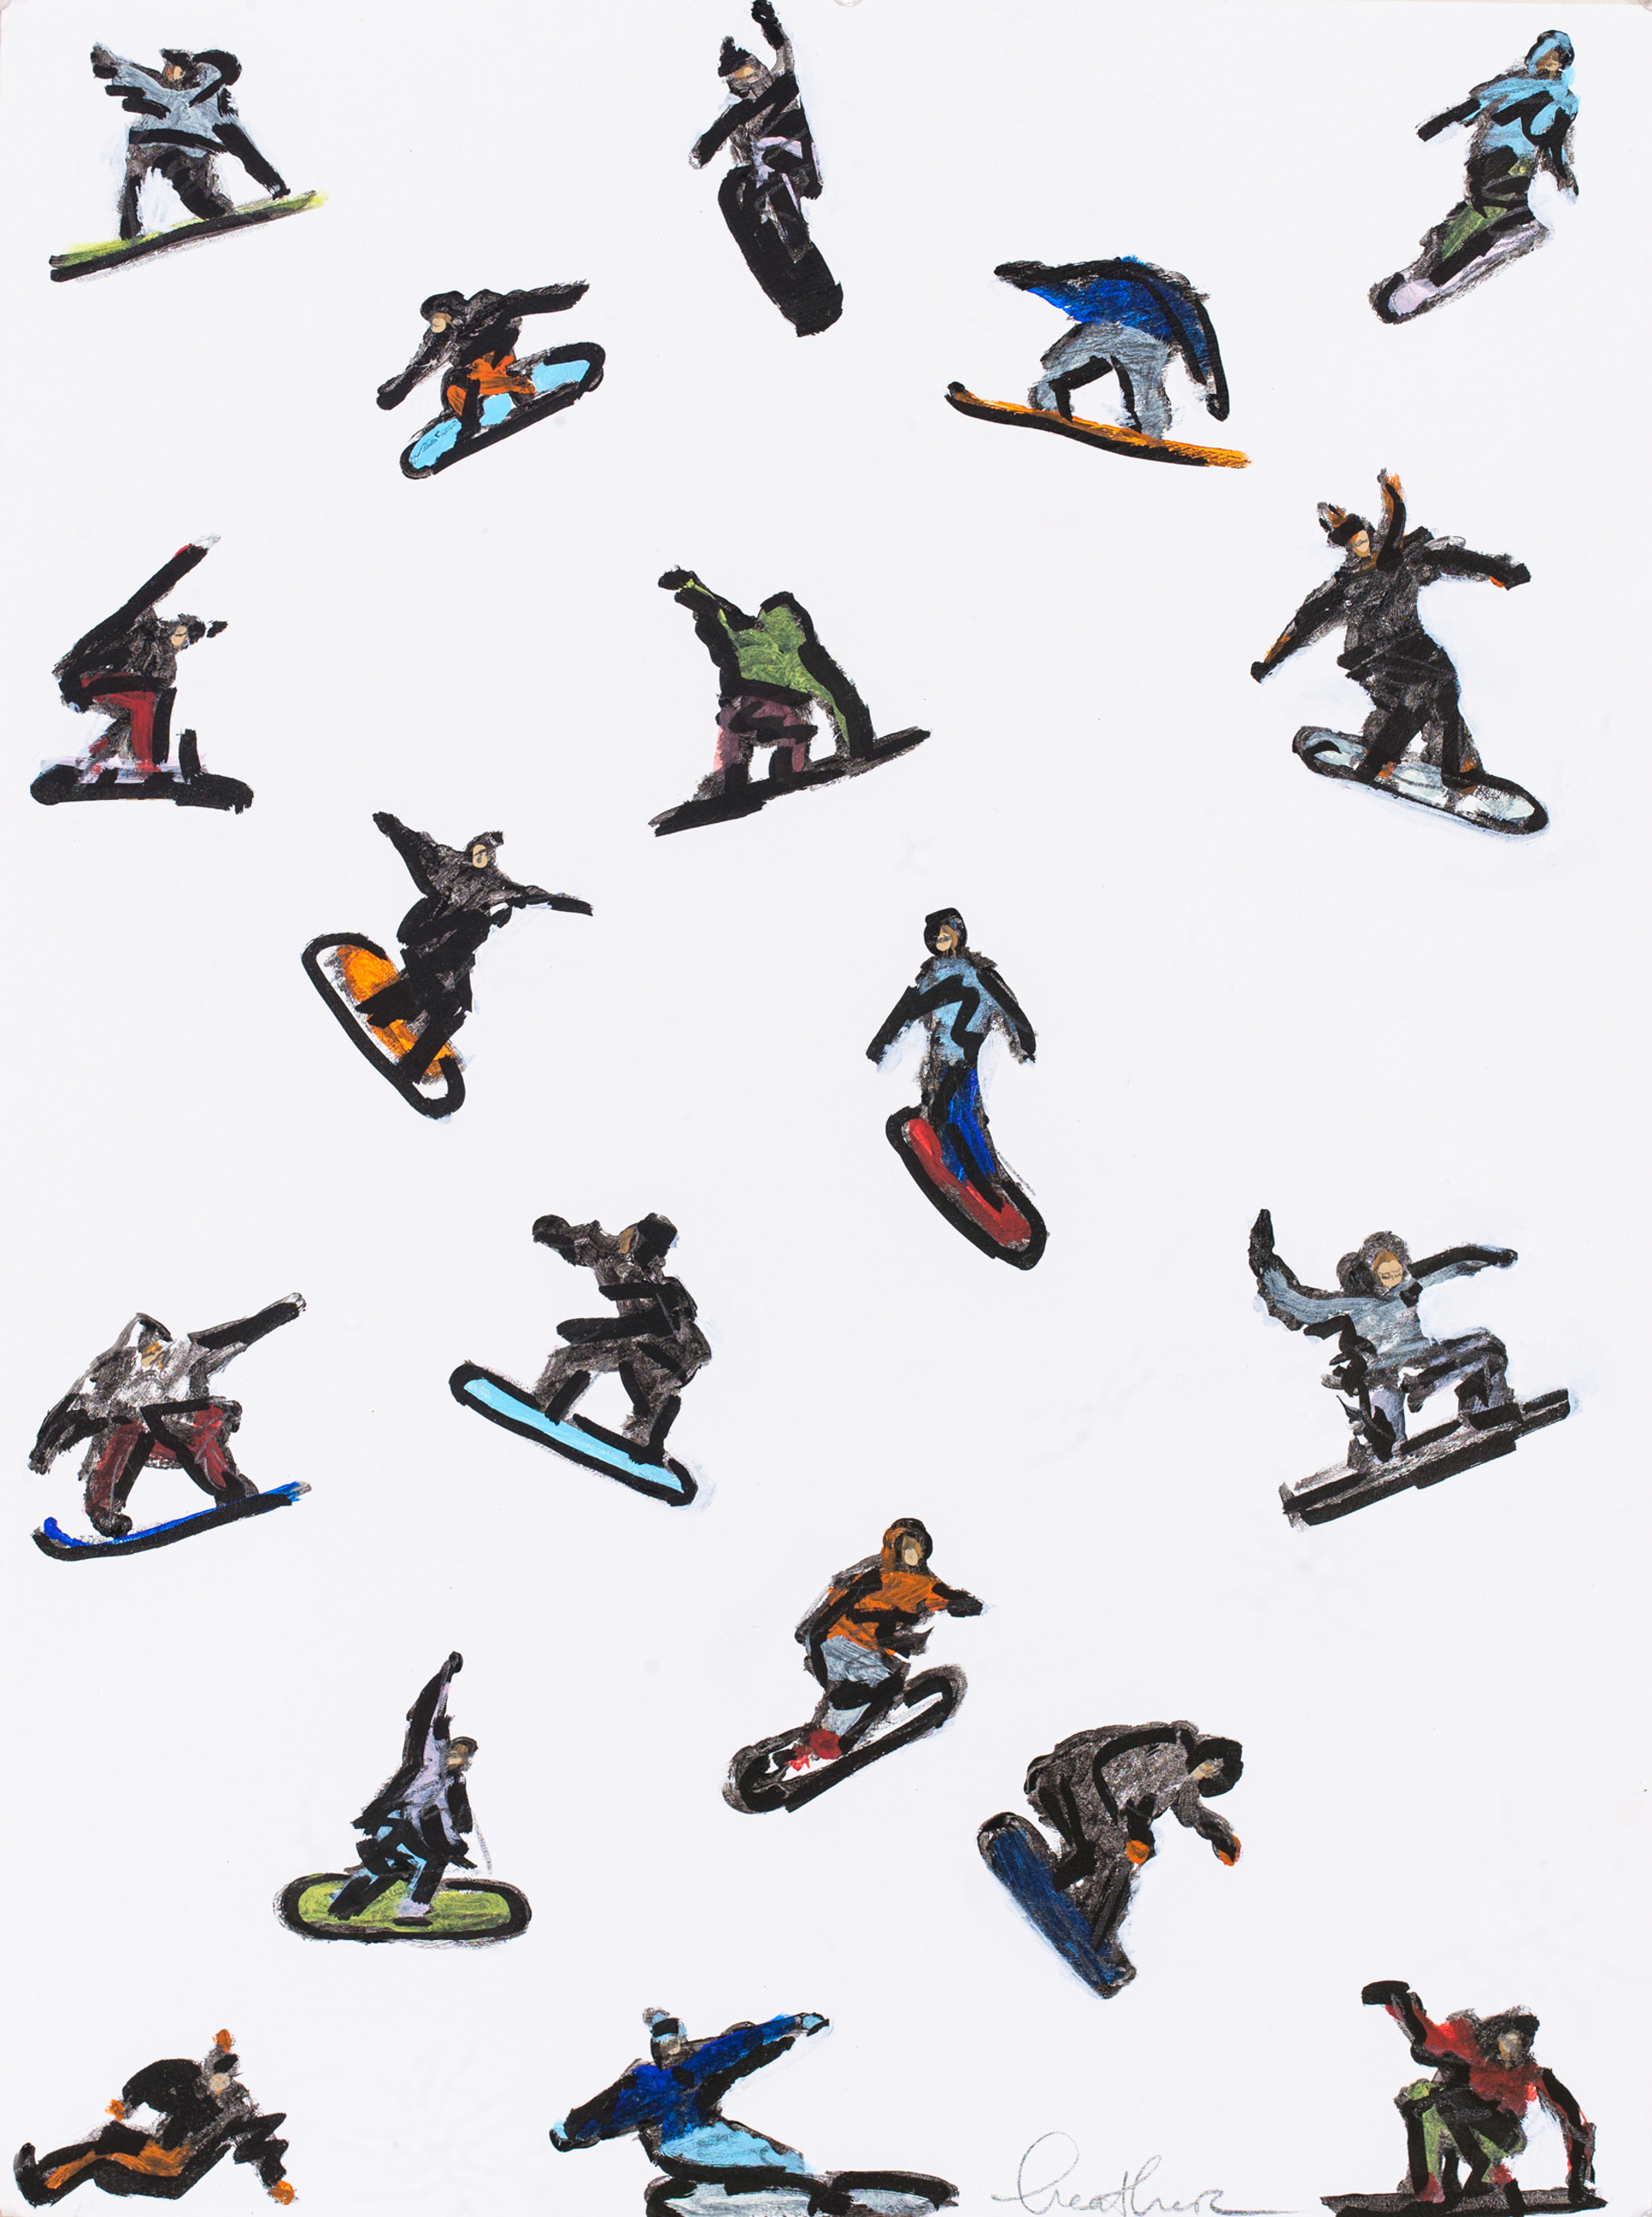 #792 Snowboarders on paper  by Heather Blanton